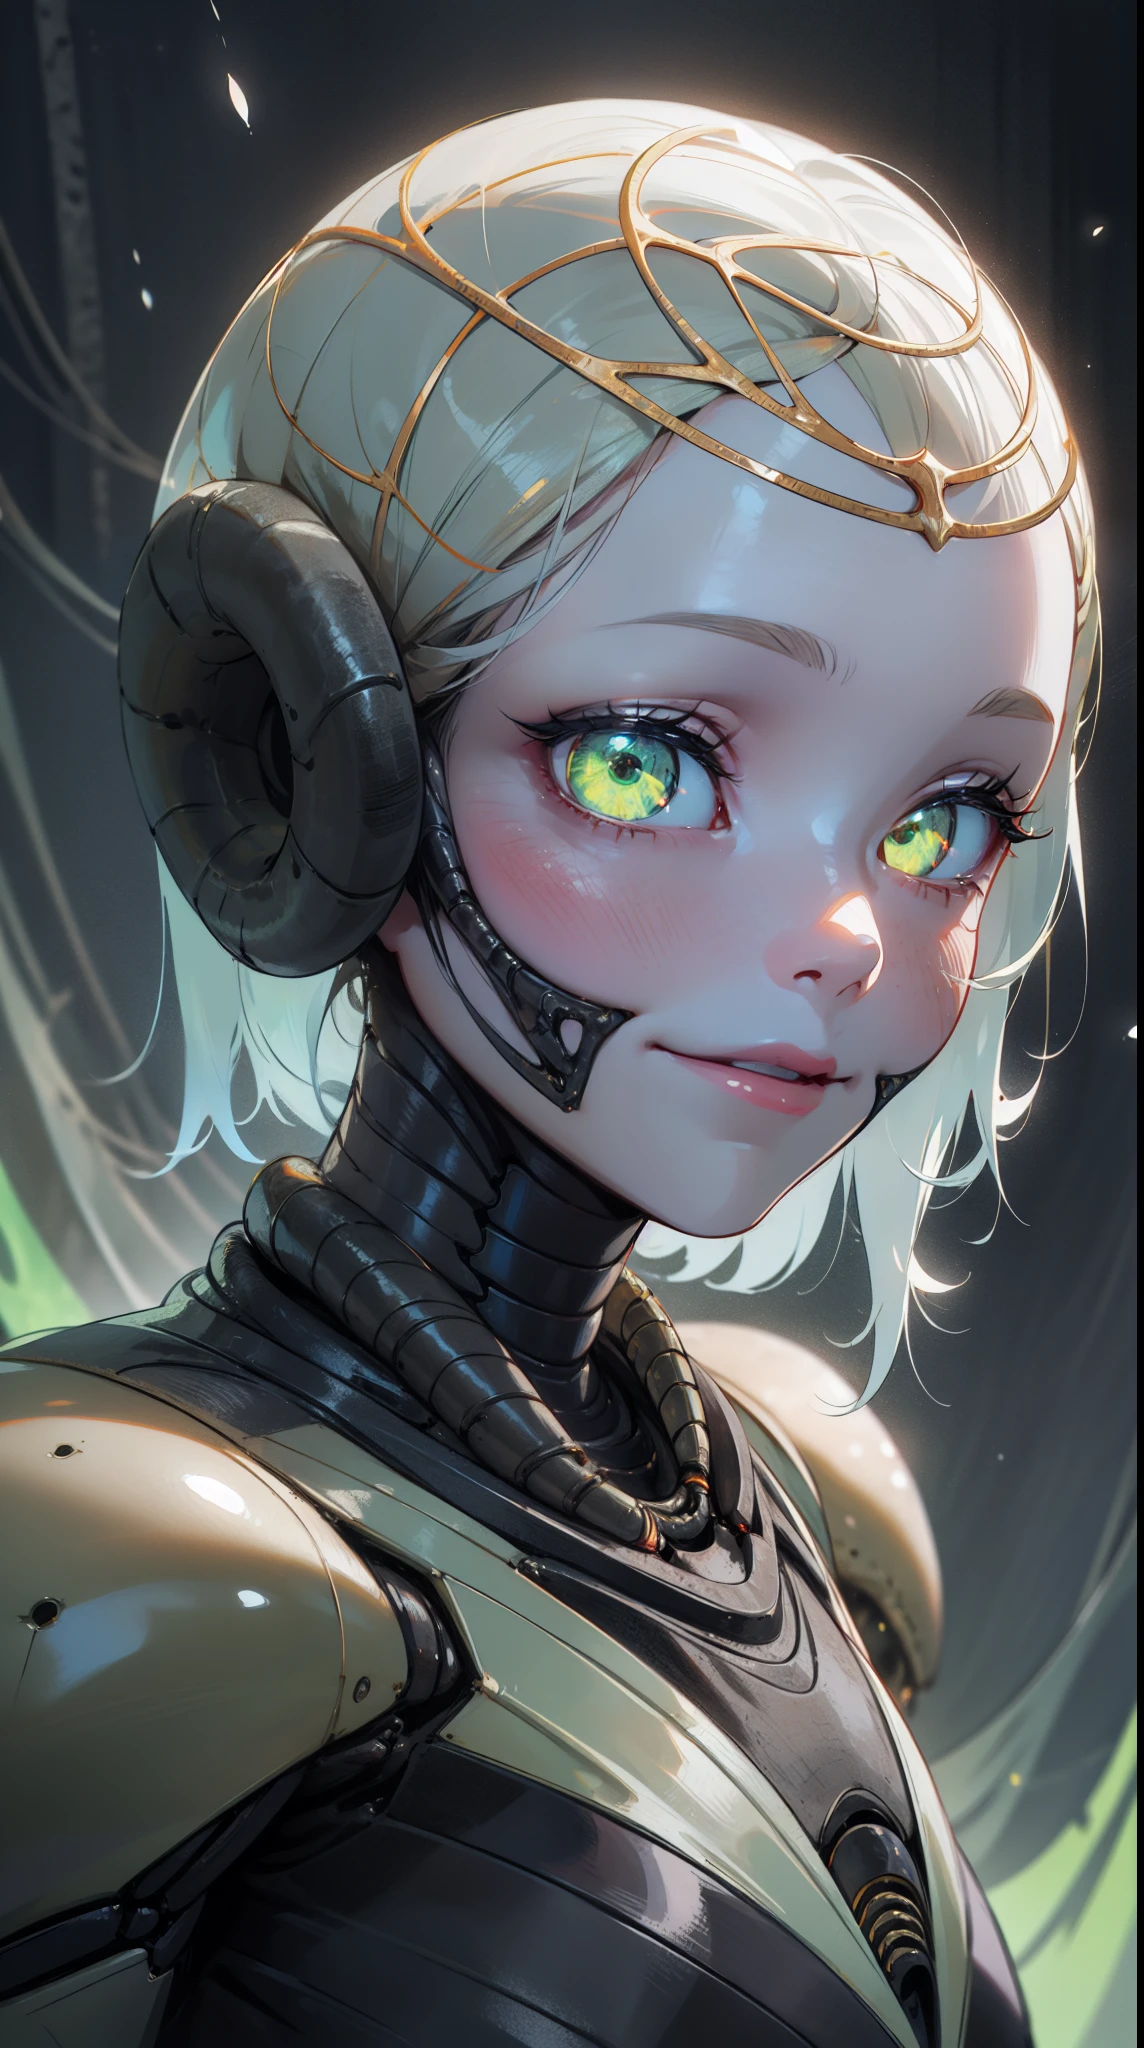 ((masterpiece)), best quality, 8k, high quality, high resolution, super detailed, ultra detailed, photorealistic, abominable and finely detailed face and eyes, ultra detailed and detailed skin texture, alien eyes, perfect face, 1 girl, chitinous exoskeleton, (insectoid form), multifaceted eyes, (alien aura), surrounded by eerie bioluminescence, crawling in an extraterrestrial environment, chilling expression, ((unnatural smile)), night, alien landscape, strange flora, otherworldly atmosphere, (unsettling sounds), (alien chirping), since ancient eons, Zara'kthul, alien eyes, background of alien landscape.